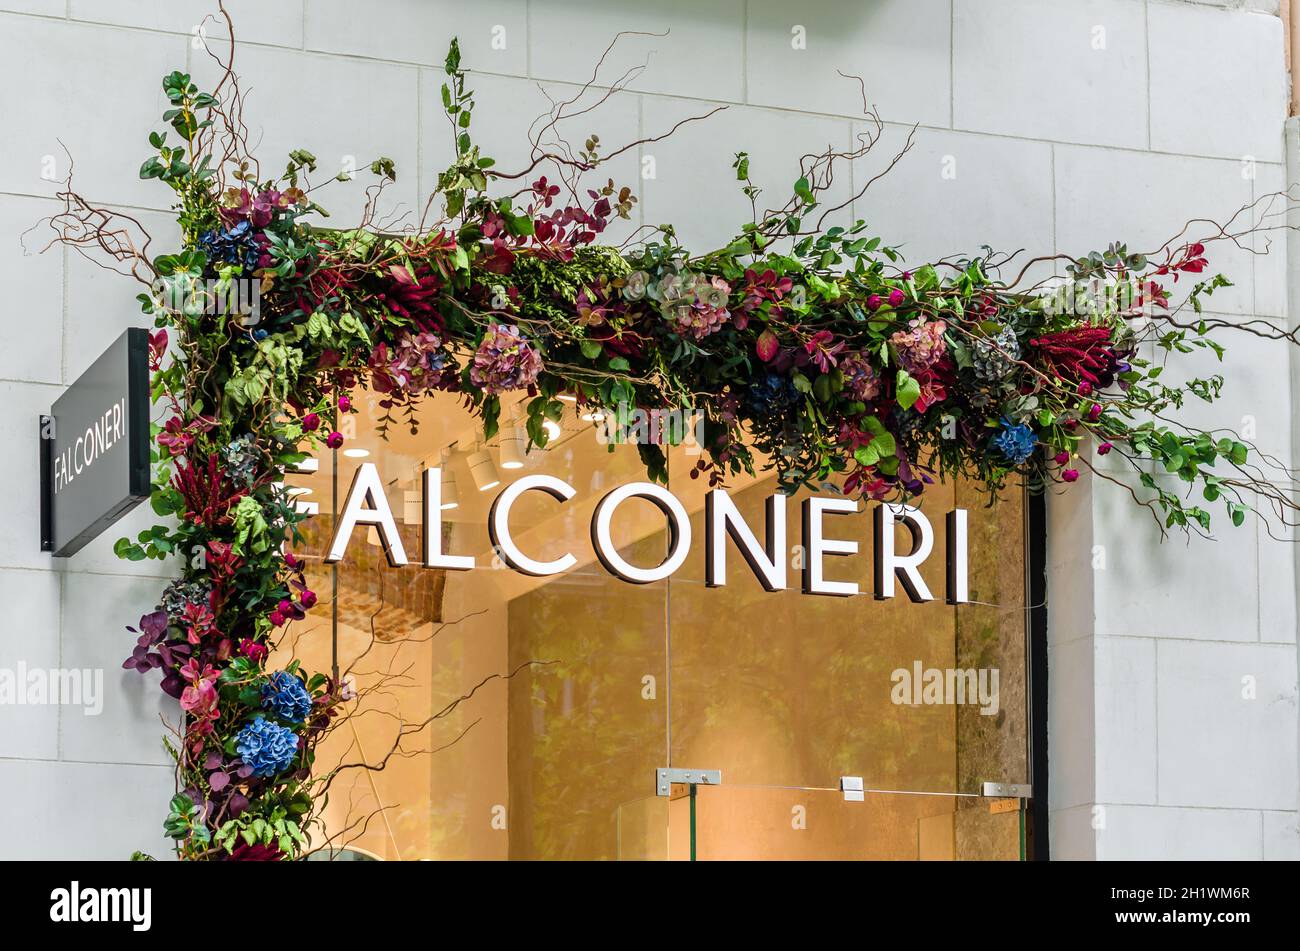 MADRID, SPAIN – MAY 12, 2021: Facade of a Falconeri store in Madrid, Spain. Stock Photo